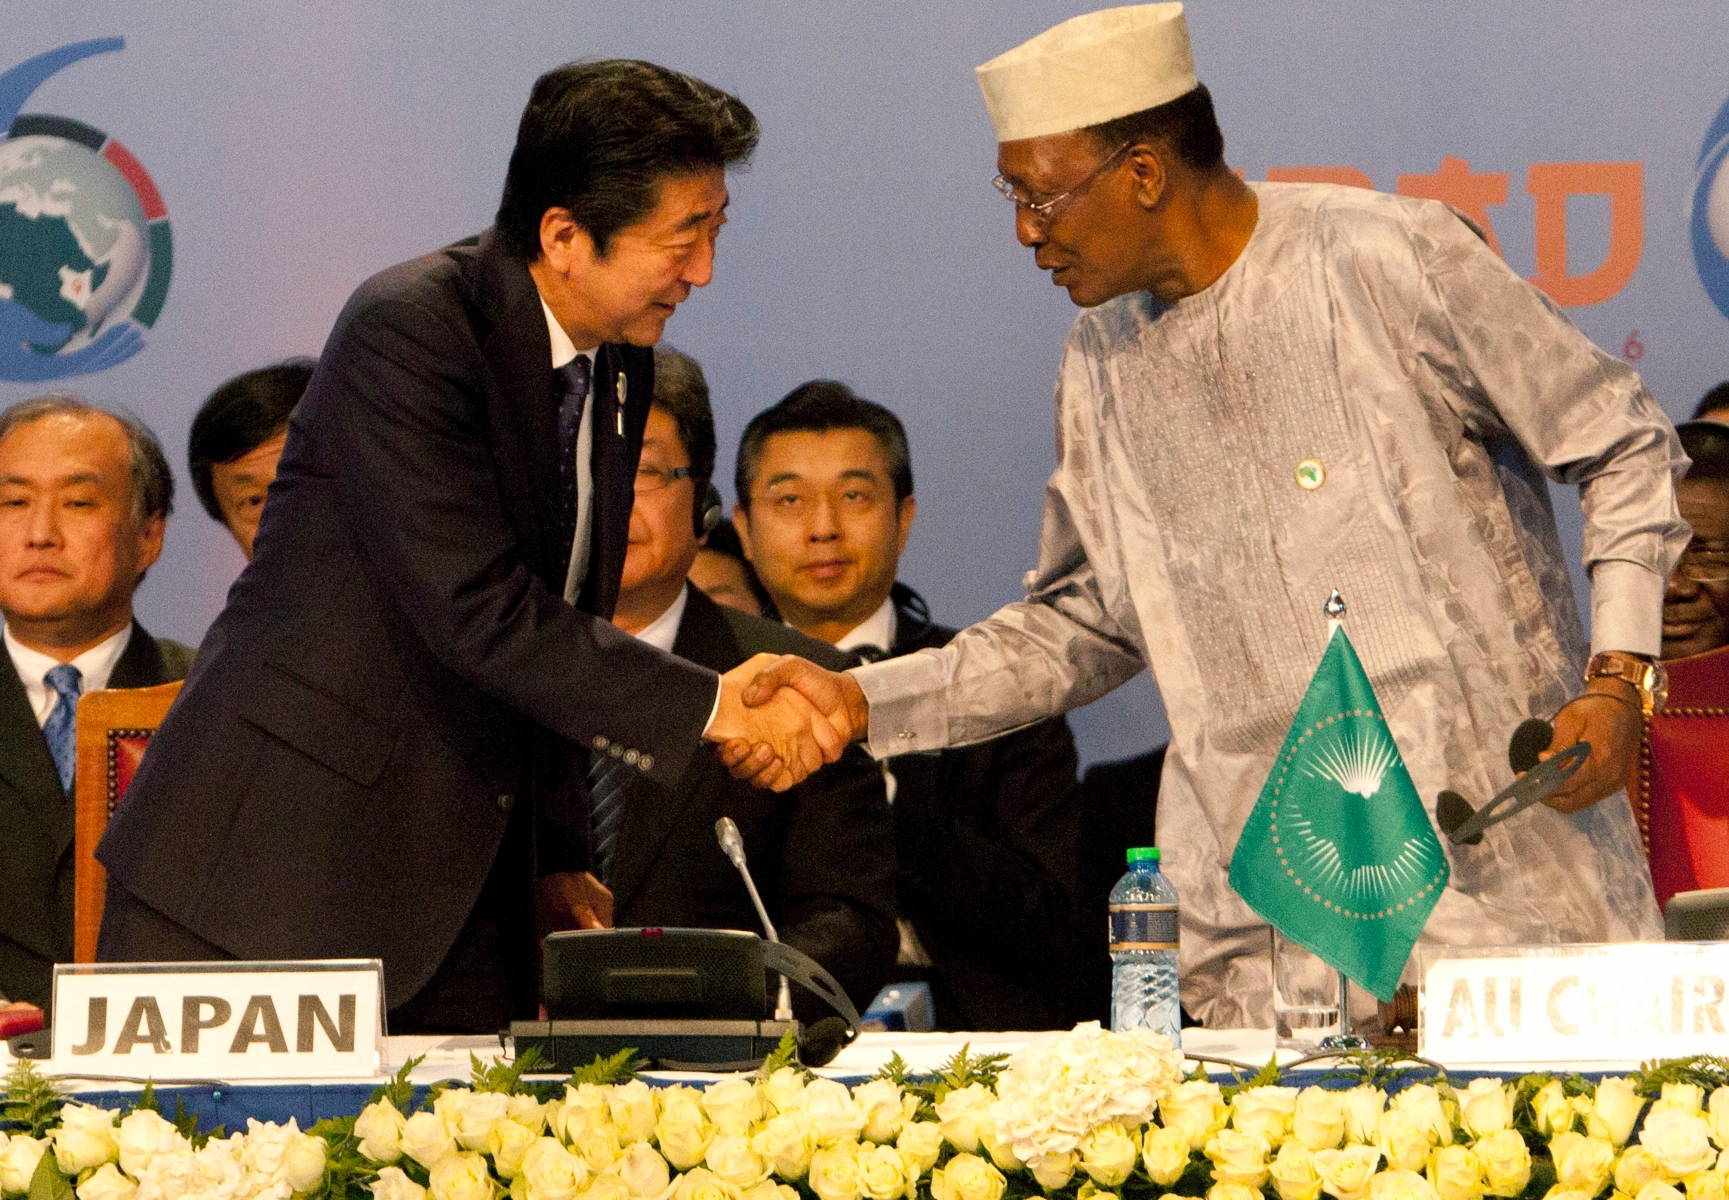 Japanese Prime Minister Shinzo Abe, left, shakes hands with Chad's President Idriss Deby during the opening of Tokyo International Conference on African Development (TICAD) at the Kenyatta International Conference Centre in Nairobi, Kenya, Saturday, Aug. 27, 2016. (AP Photo/Sayyid Abdul Azim) Kenya Japan TICAD